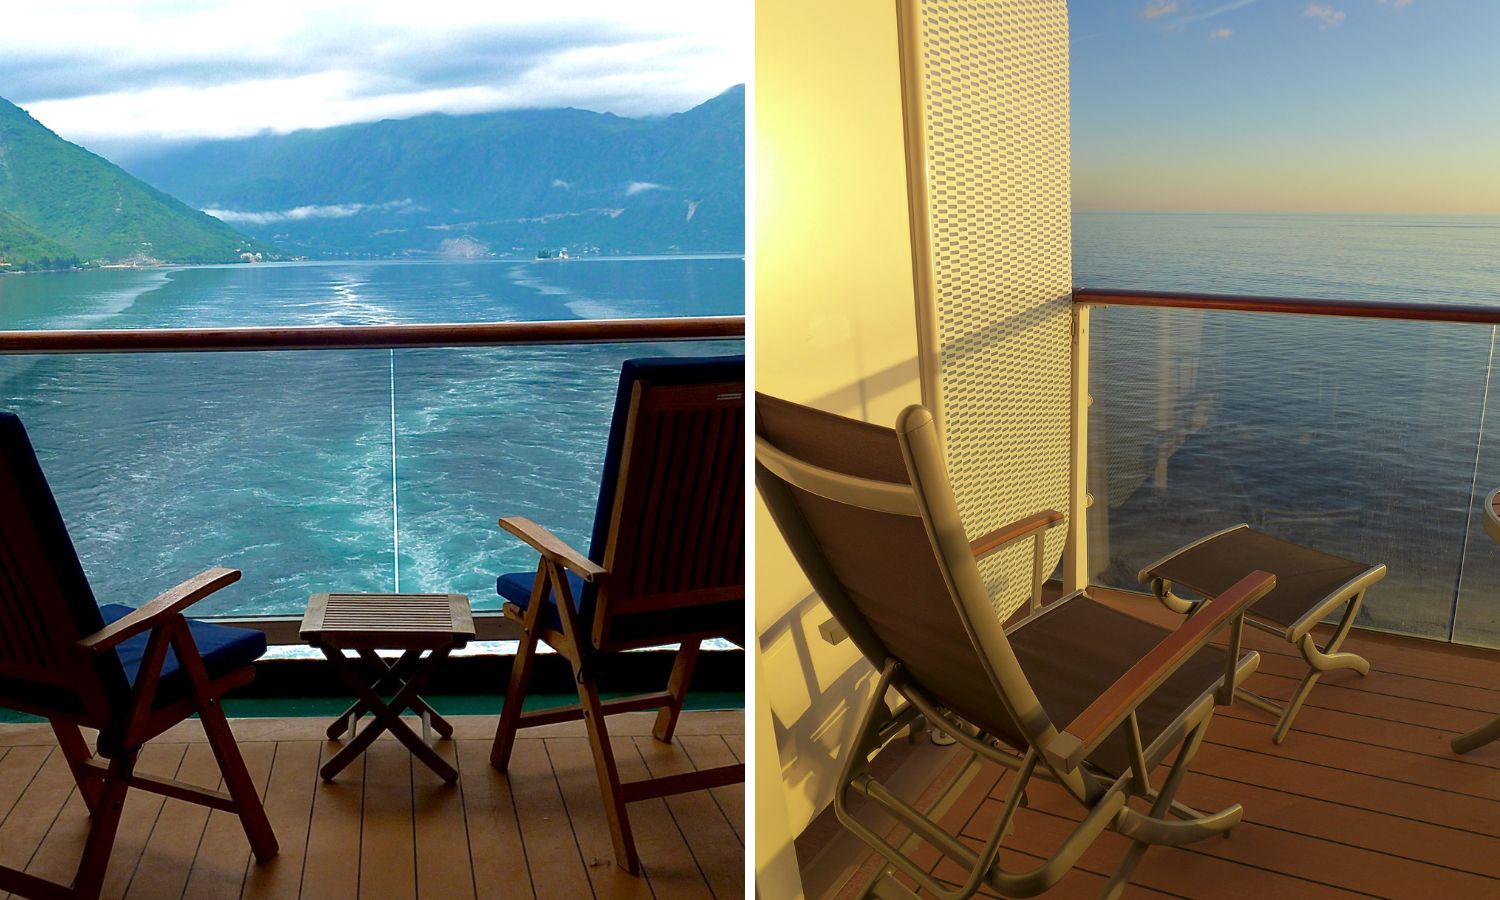 aft balcony space on a cruise ship